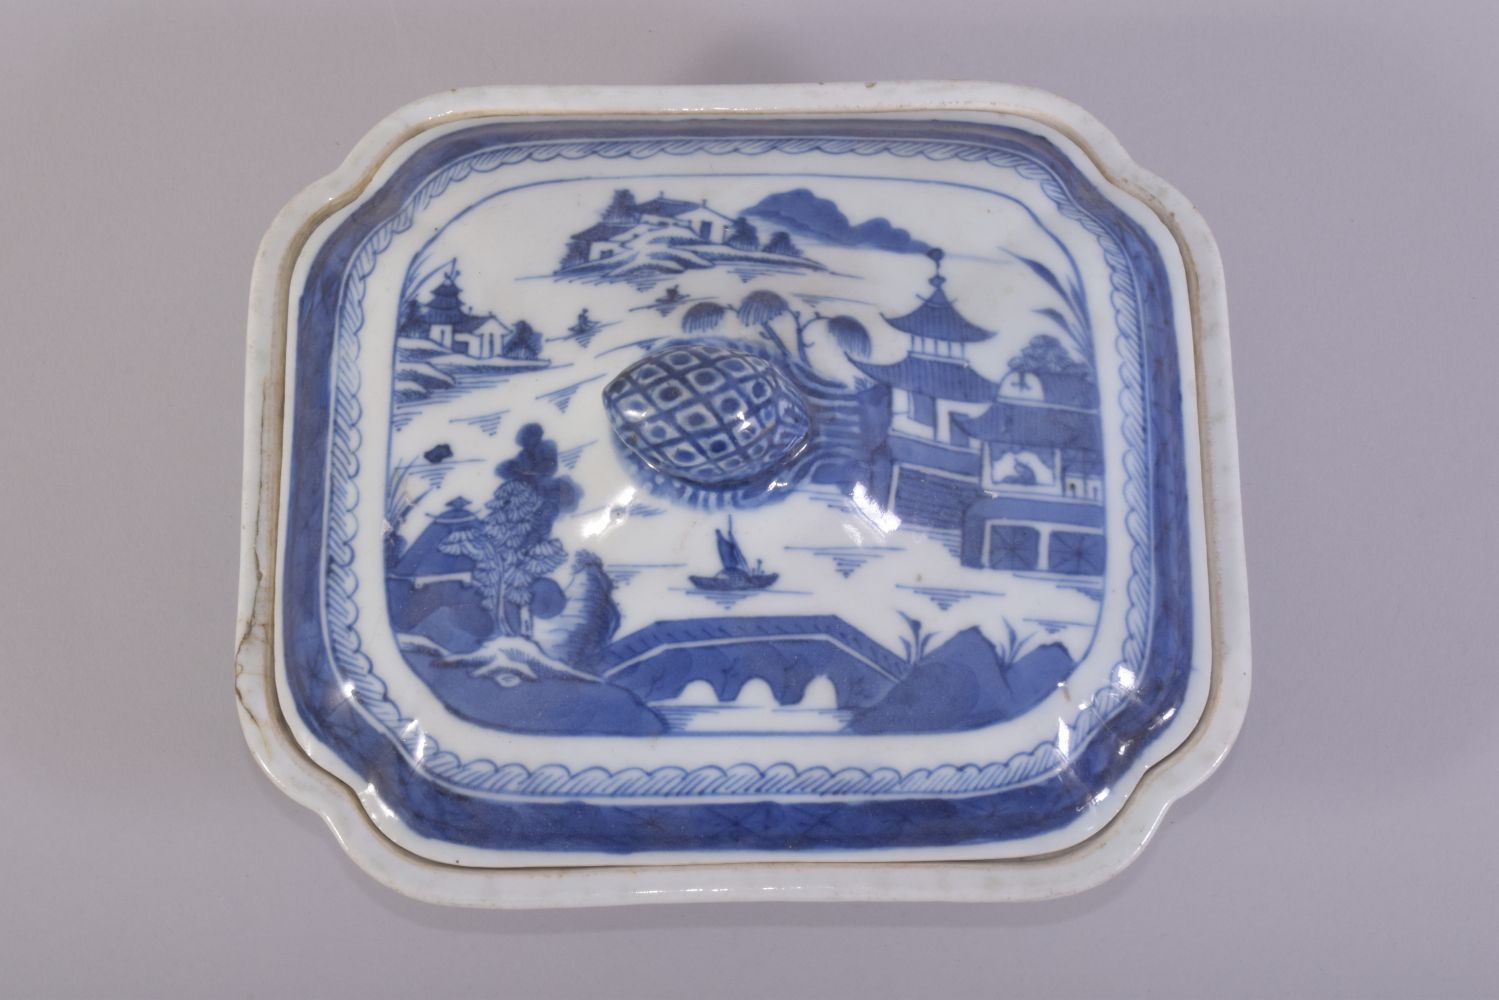 A CHINESE BLUE AND WHITE PORCELAIN TUREEN AND COVER, decorated with landscape scenes of buildings - Image 5 of 8